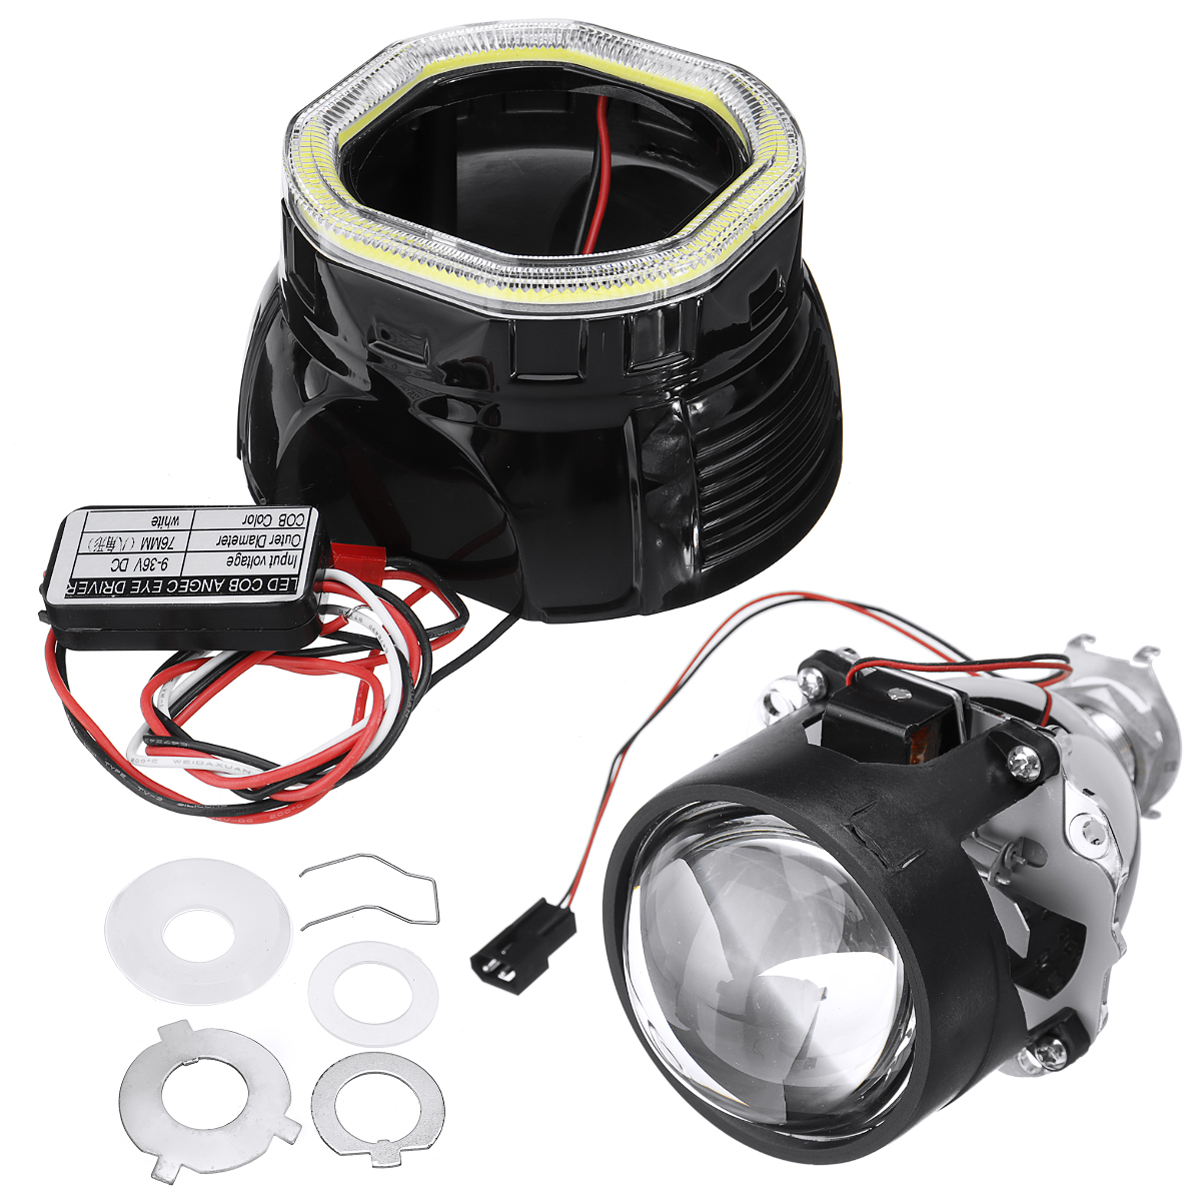 2.5 Incn Car COB LED Angel Eyes Halo Headlight Day Running Lights DRL HID Xenon Projector Lens Kit Square for LHD